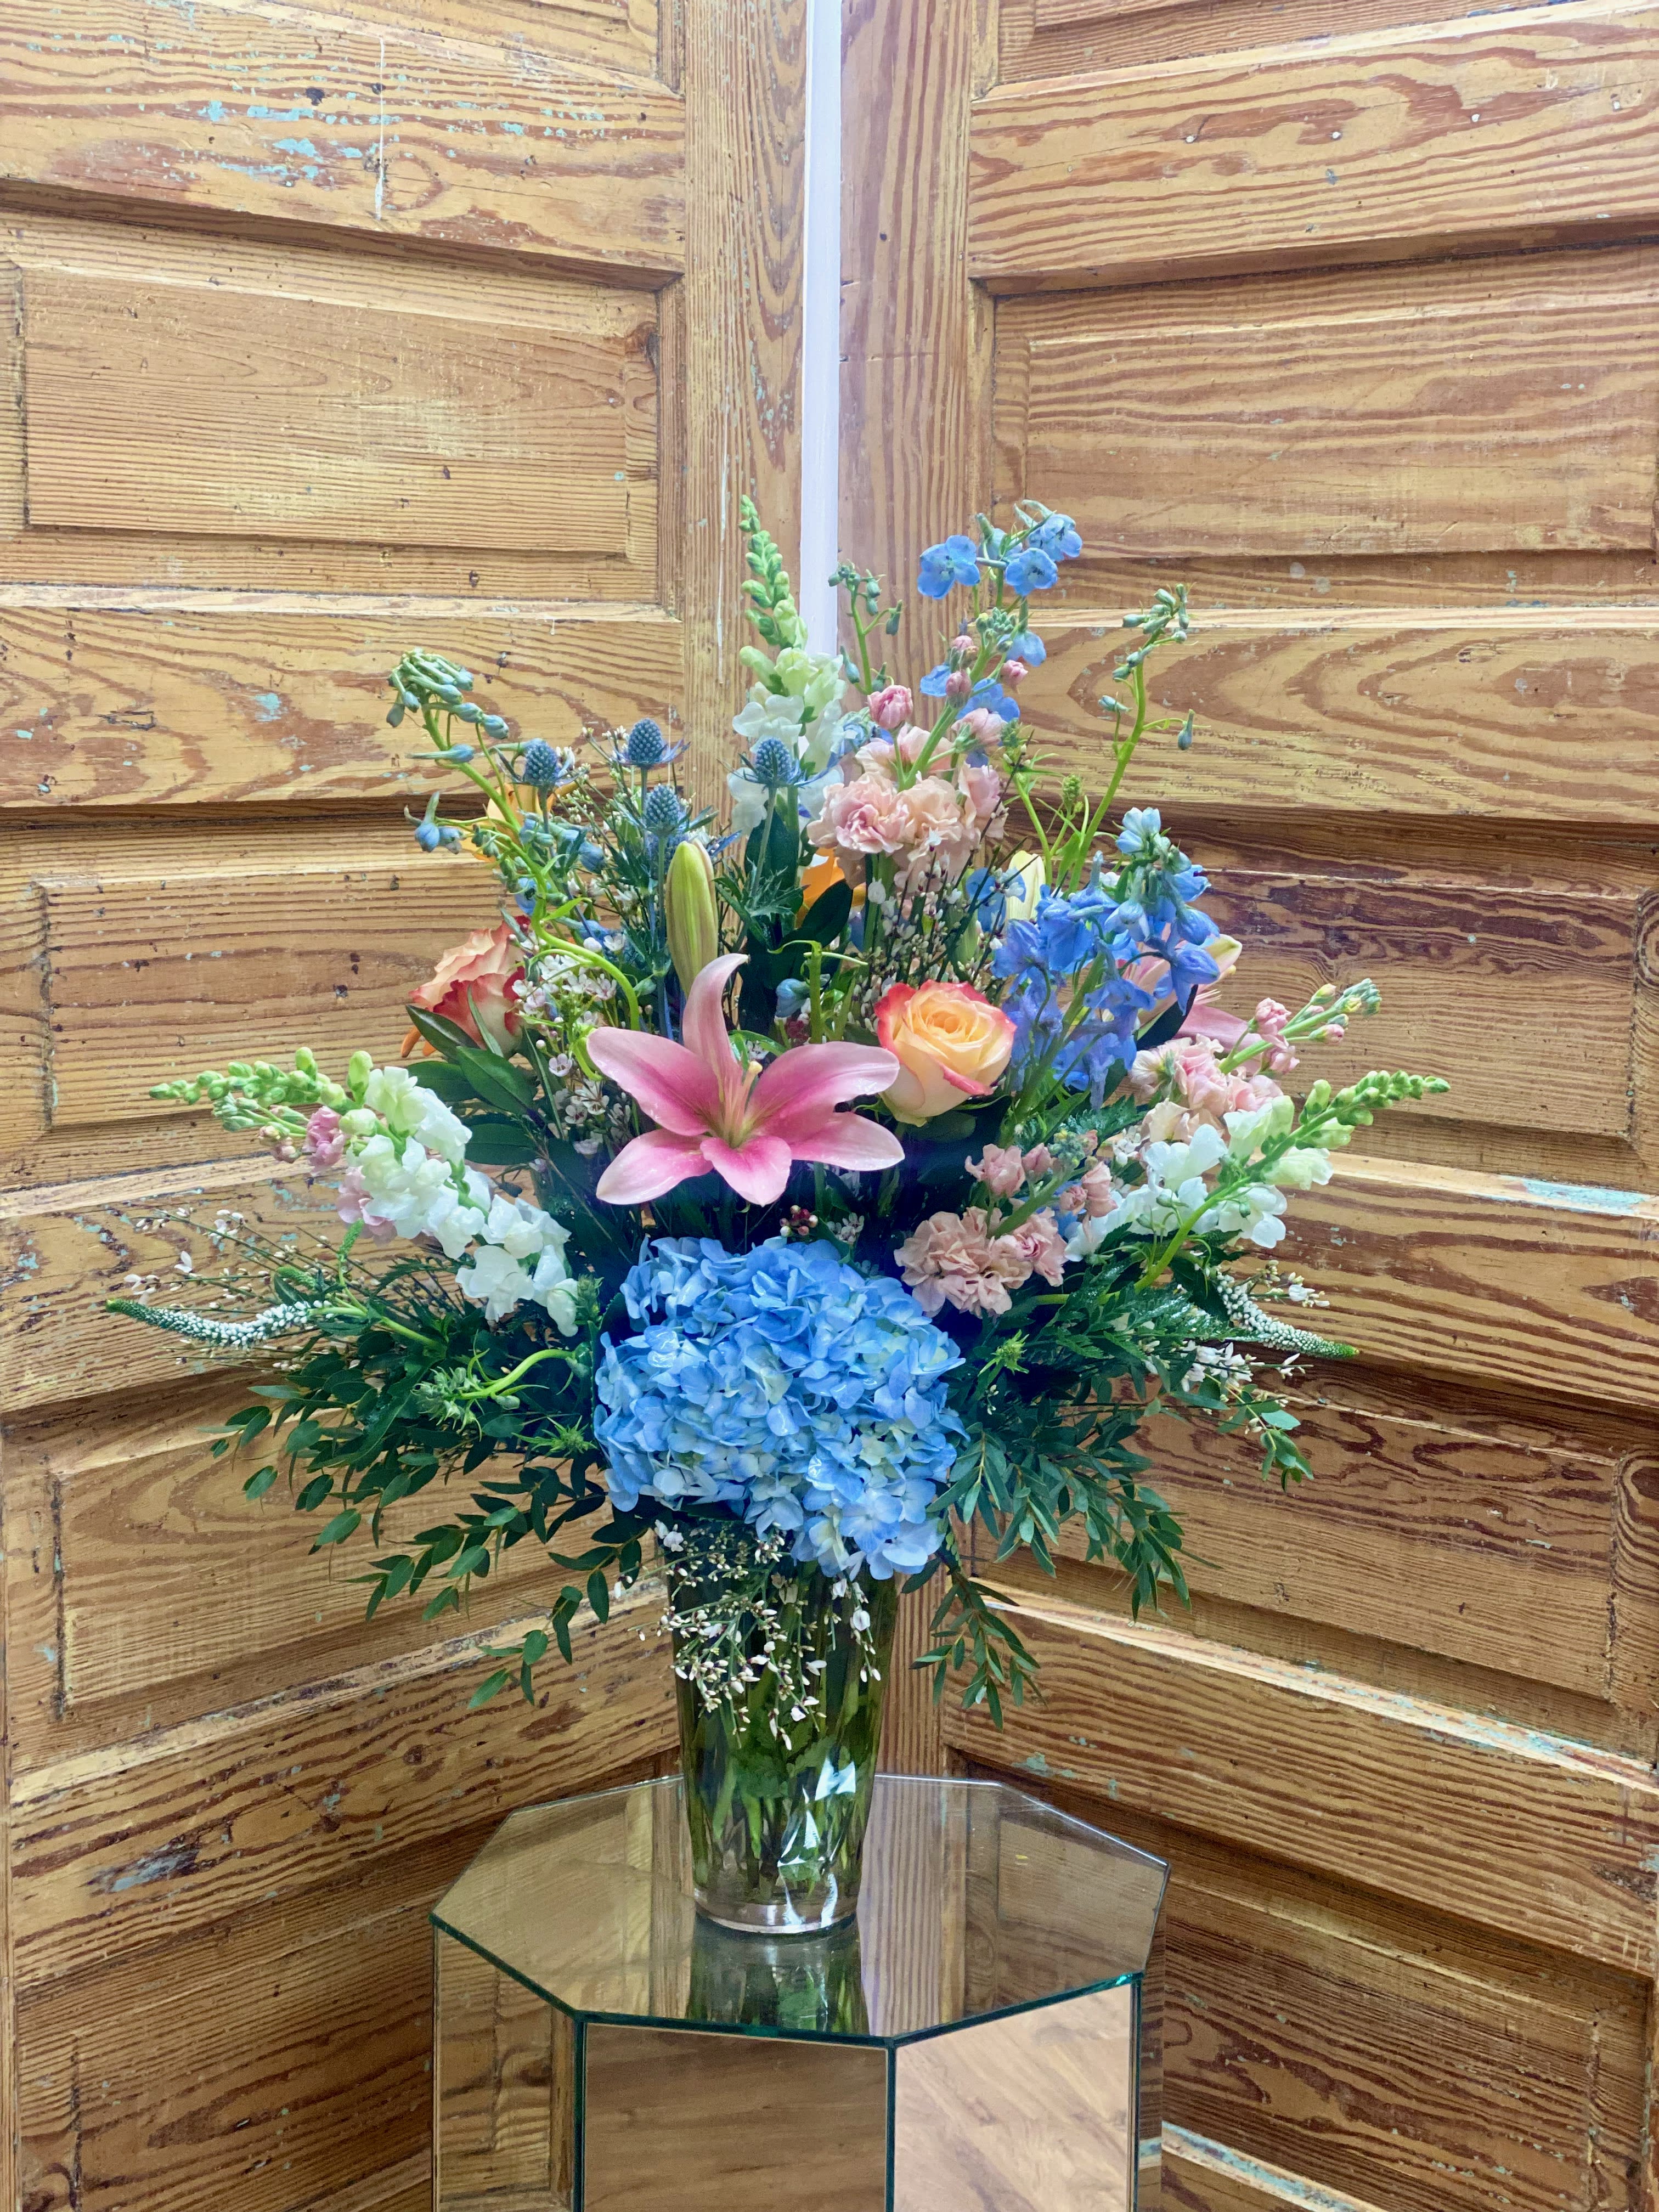 The Donna - Beautiful arrangement featuring hydrangea, delphinium, snap dragons, roses, lillies and more!